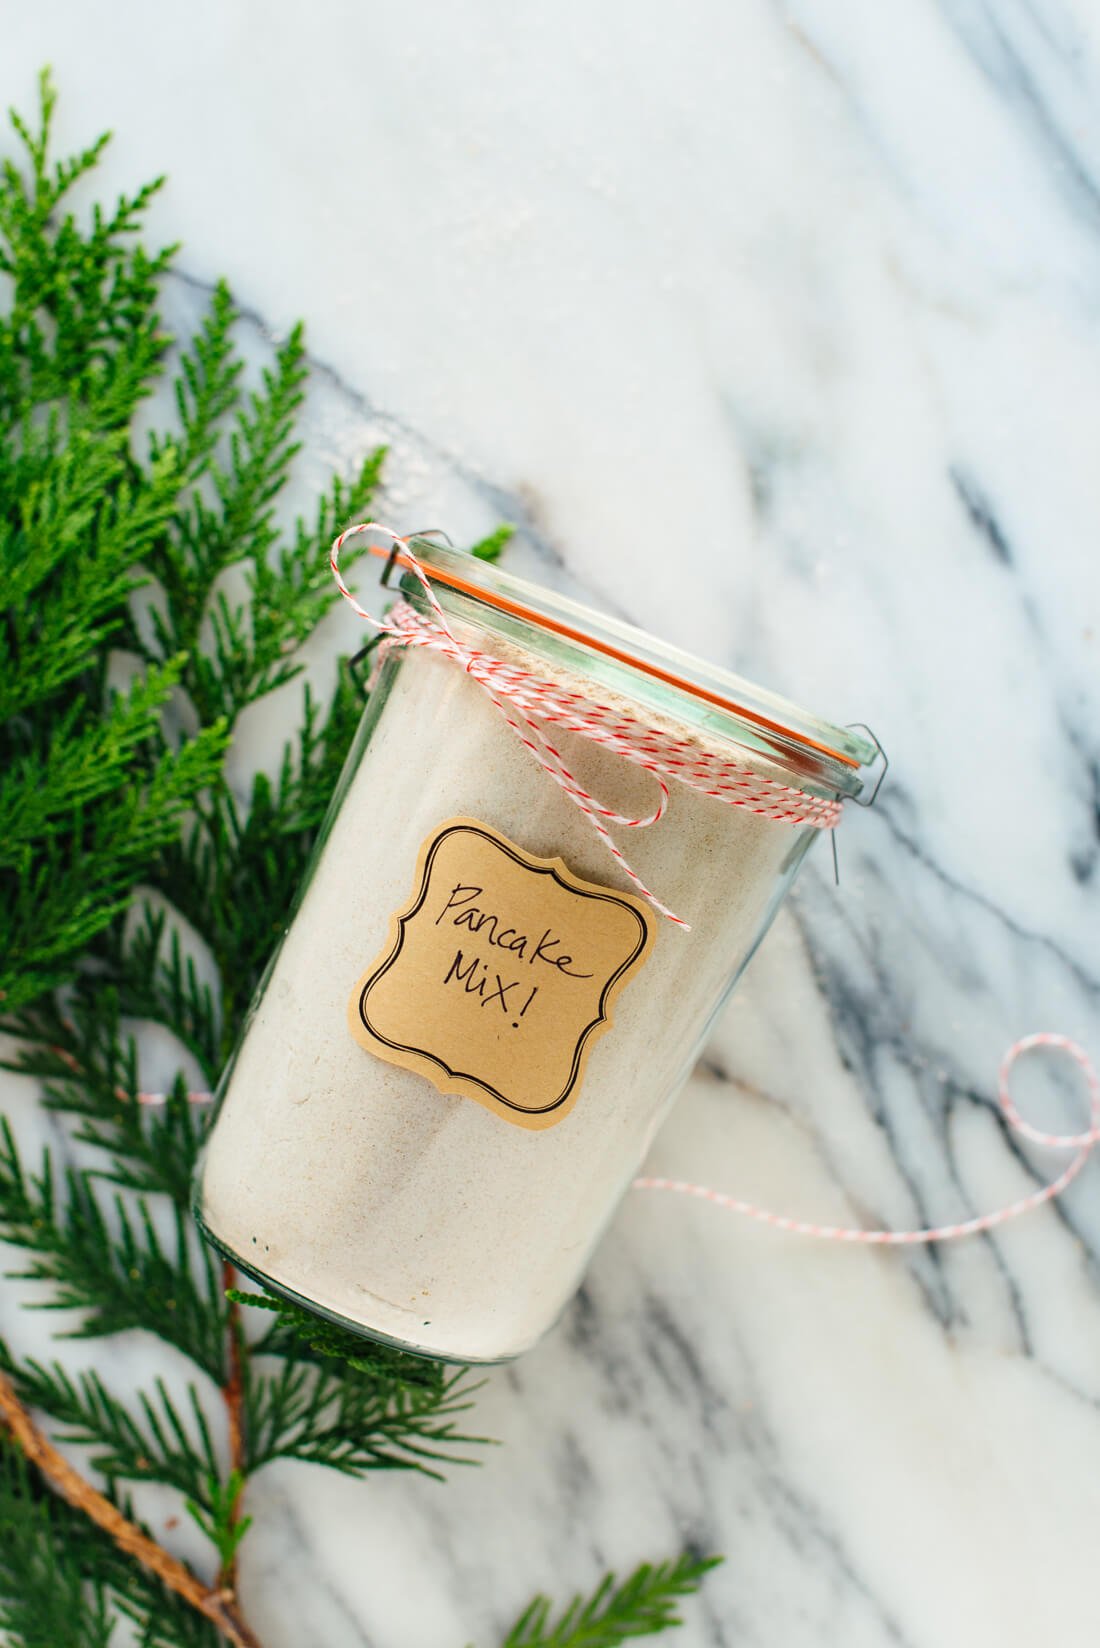 This whole wheat pancake mix is a cute, thoughtful and affordable holiday gift! Your friends and family will love it.